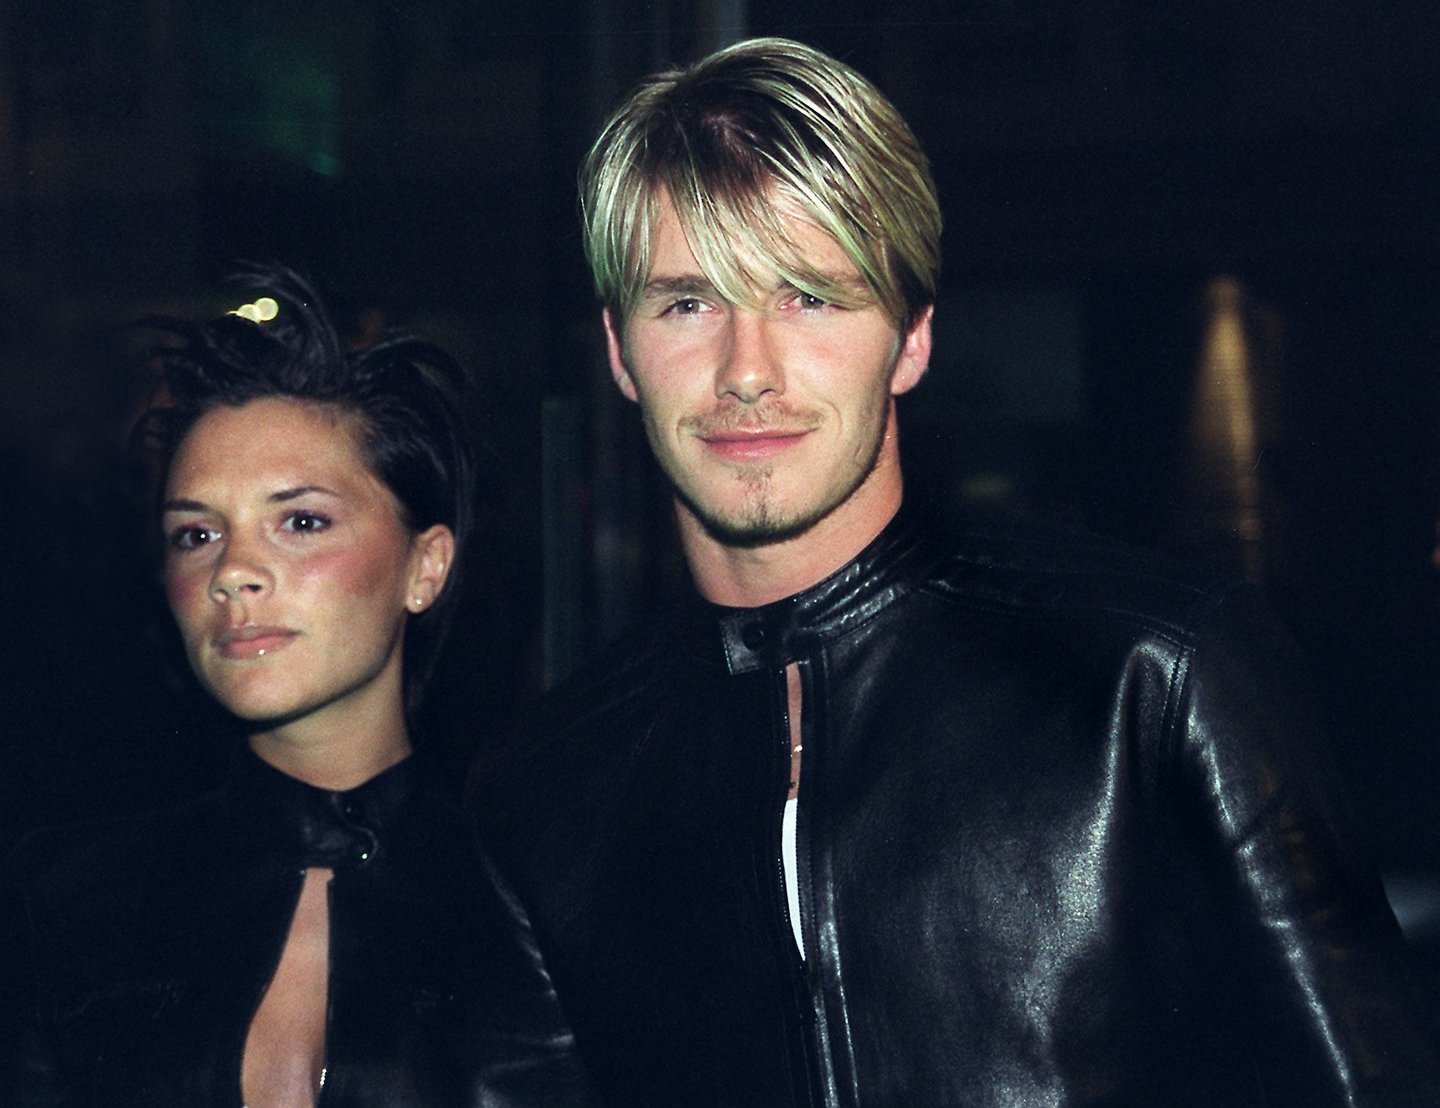 Spice Girls Victoria Adams (L) arrives with her husband, Manchester United and England star David Beckham (R), to a Versace star-studded reception hosted by Donatella Versace in London late Friday 11 June 1999. The reception comes after the Versace "Diamonds are forever" charity fashion event 09 June which raised funds for three charities including the Prince's Foundation for architecture and the environment. (Photo credit should read SINEAD LYNCH/AFP/Getty Images)